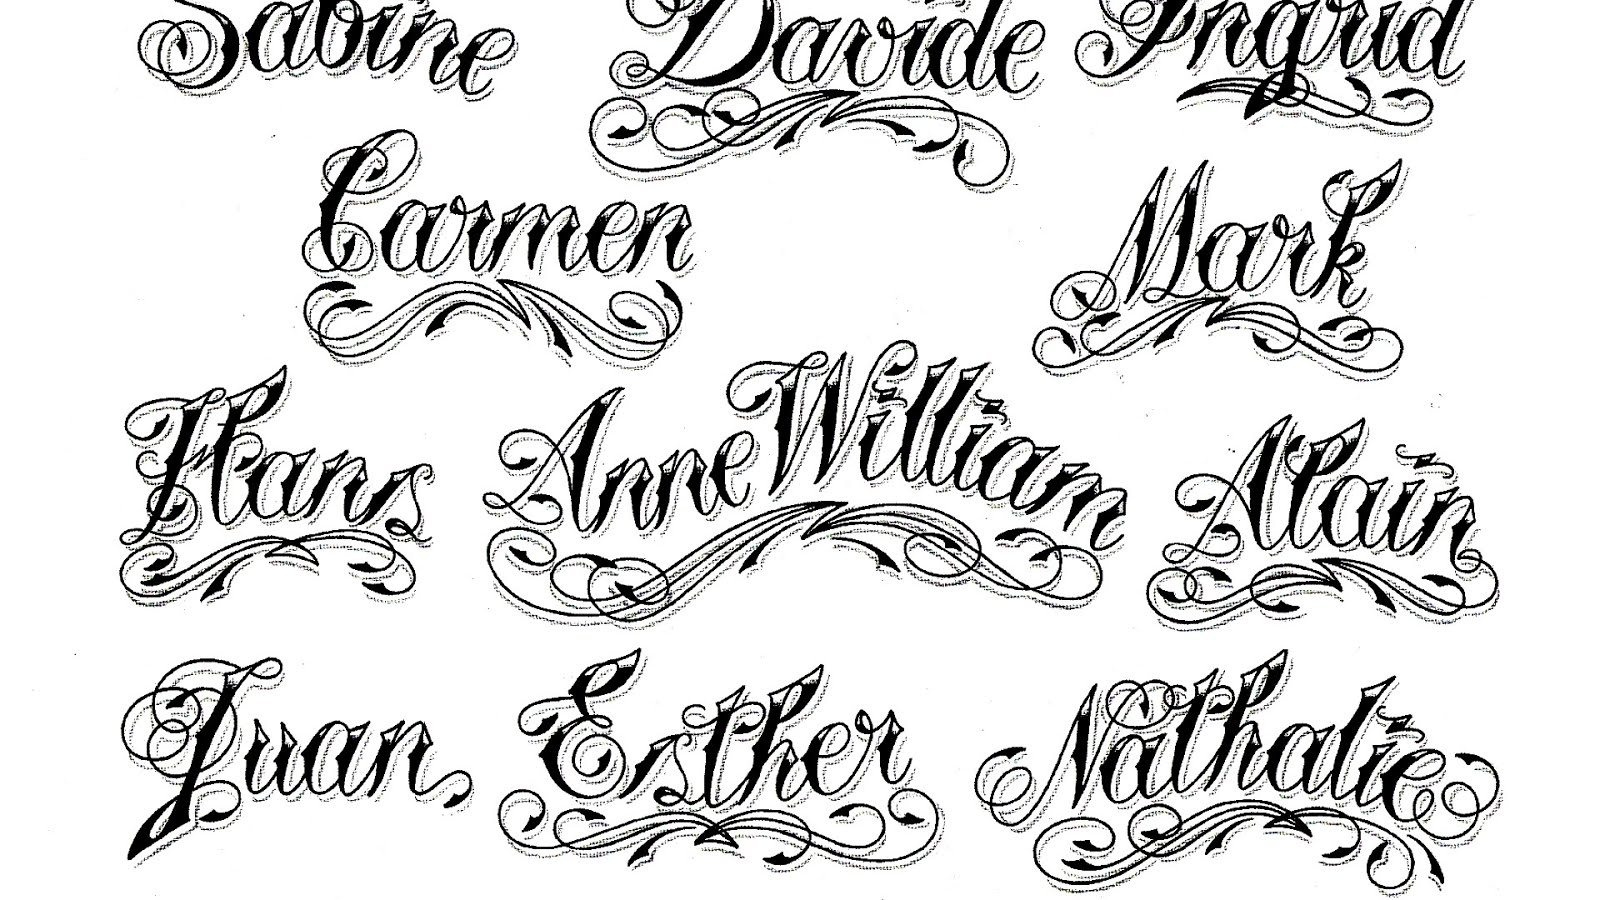 1. Tattoo Font Generator - Create Your Own Tattoo Lettering - wide 8